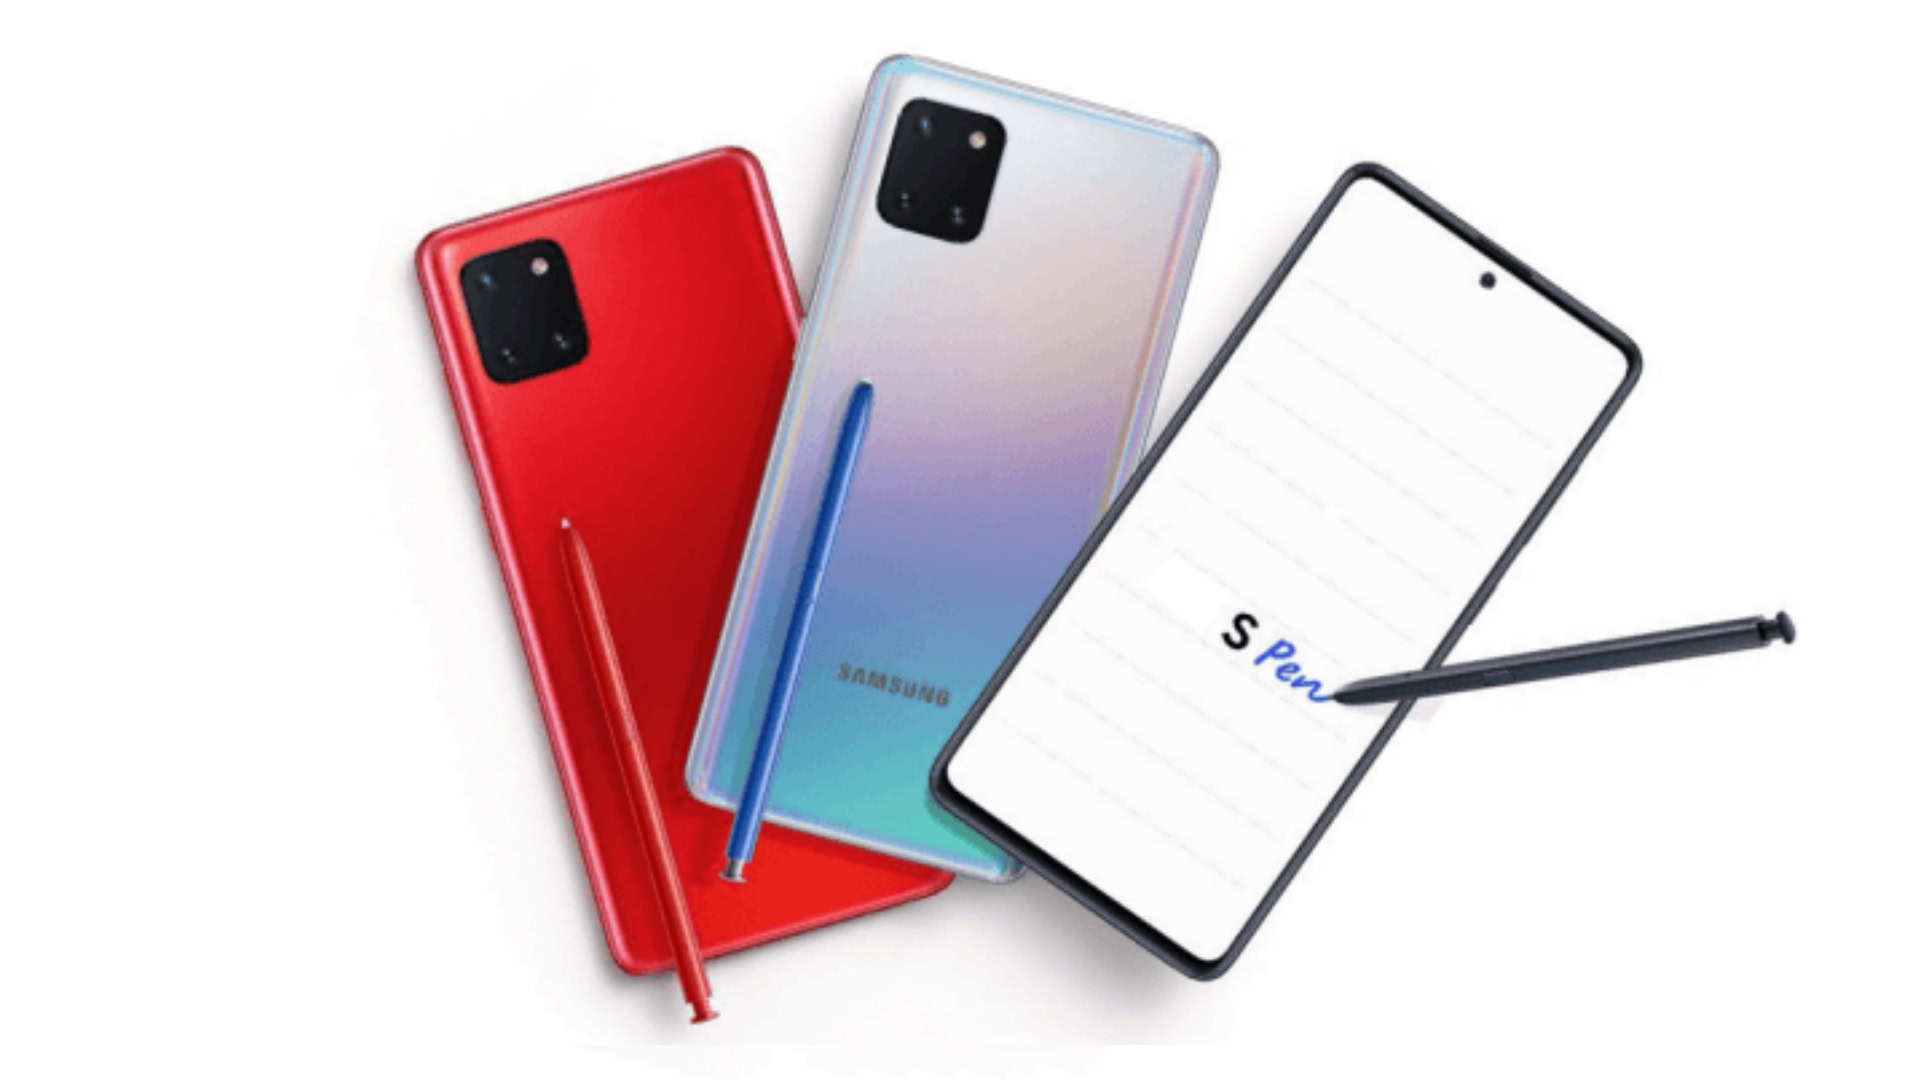 Samsung Galaxy Note 10 Lite Review: The new flagship killer! - TechPP